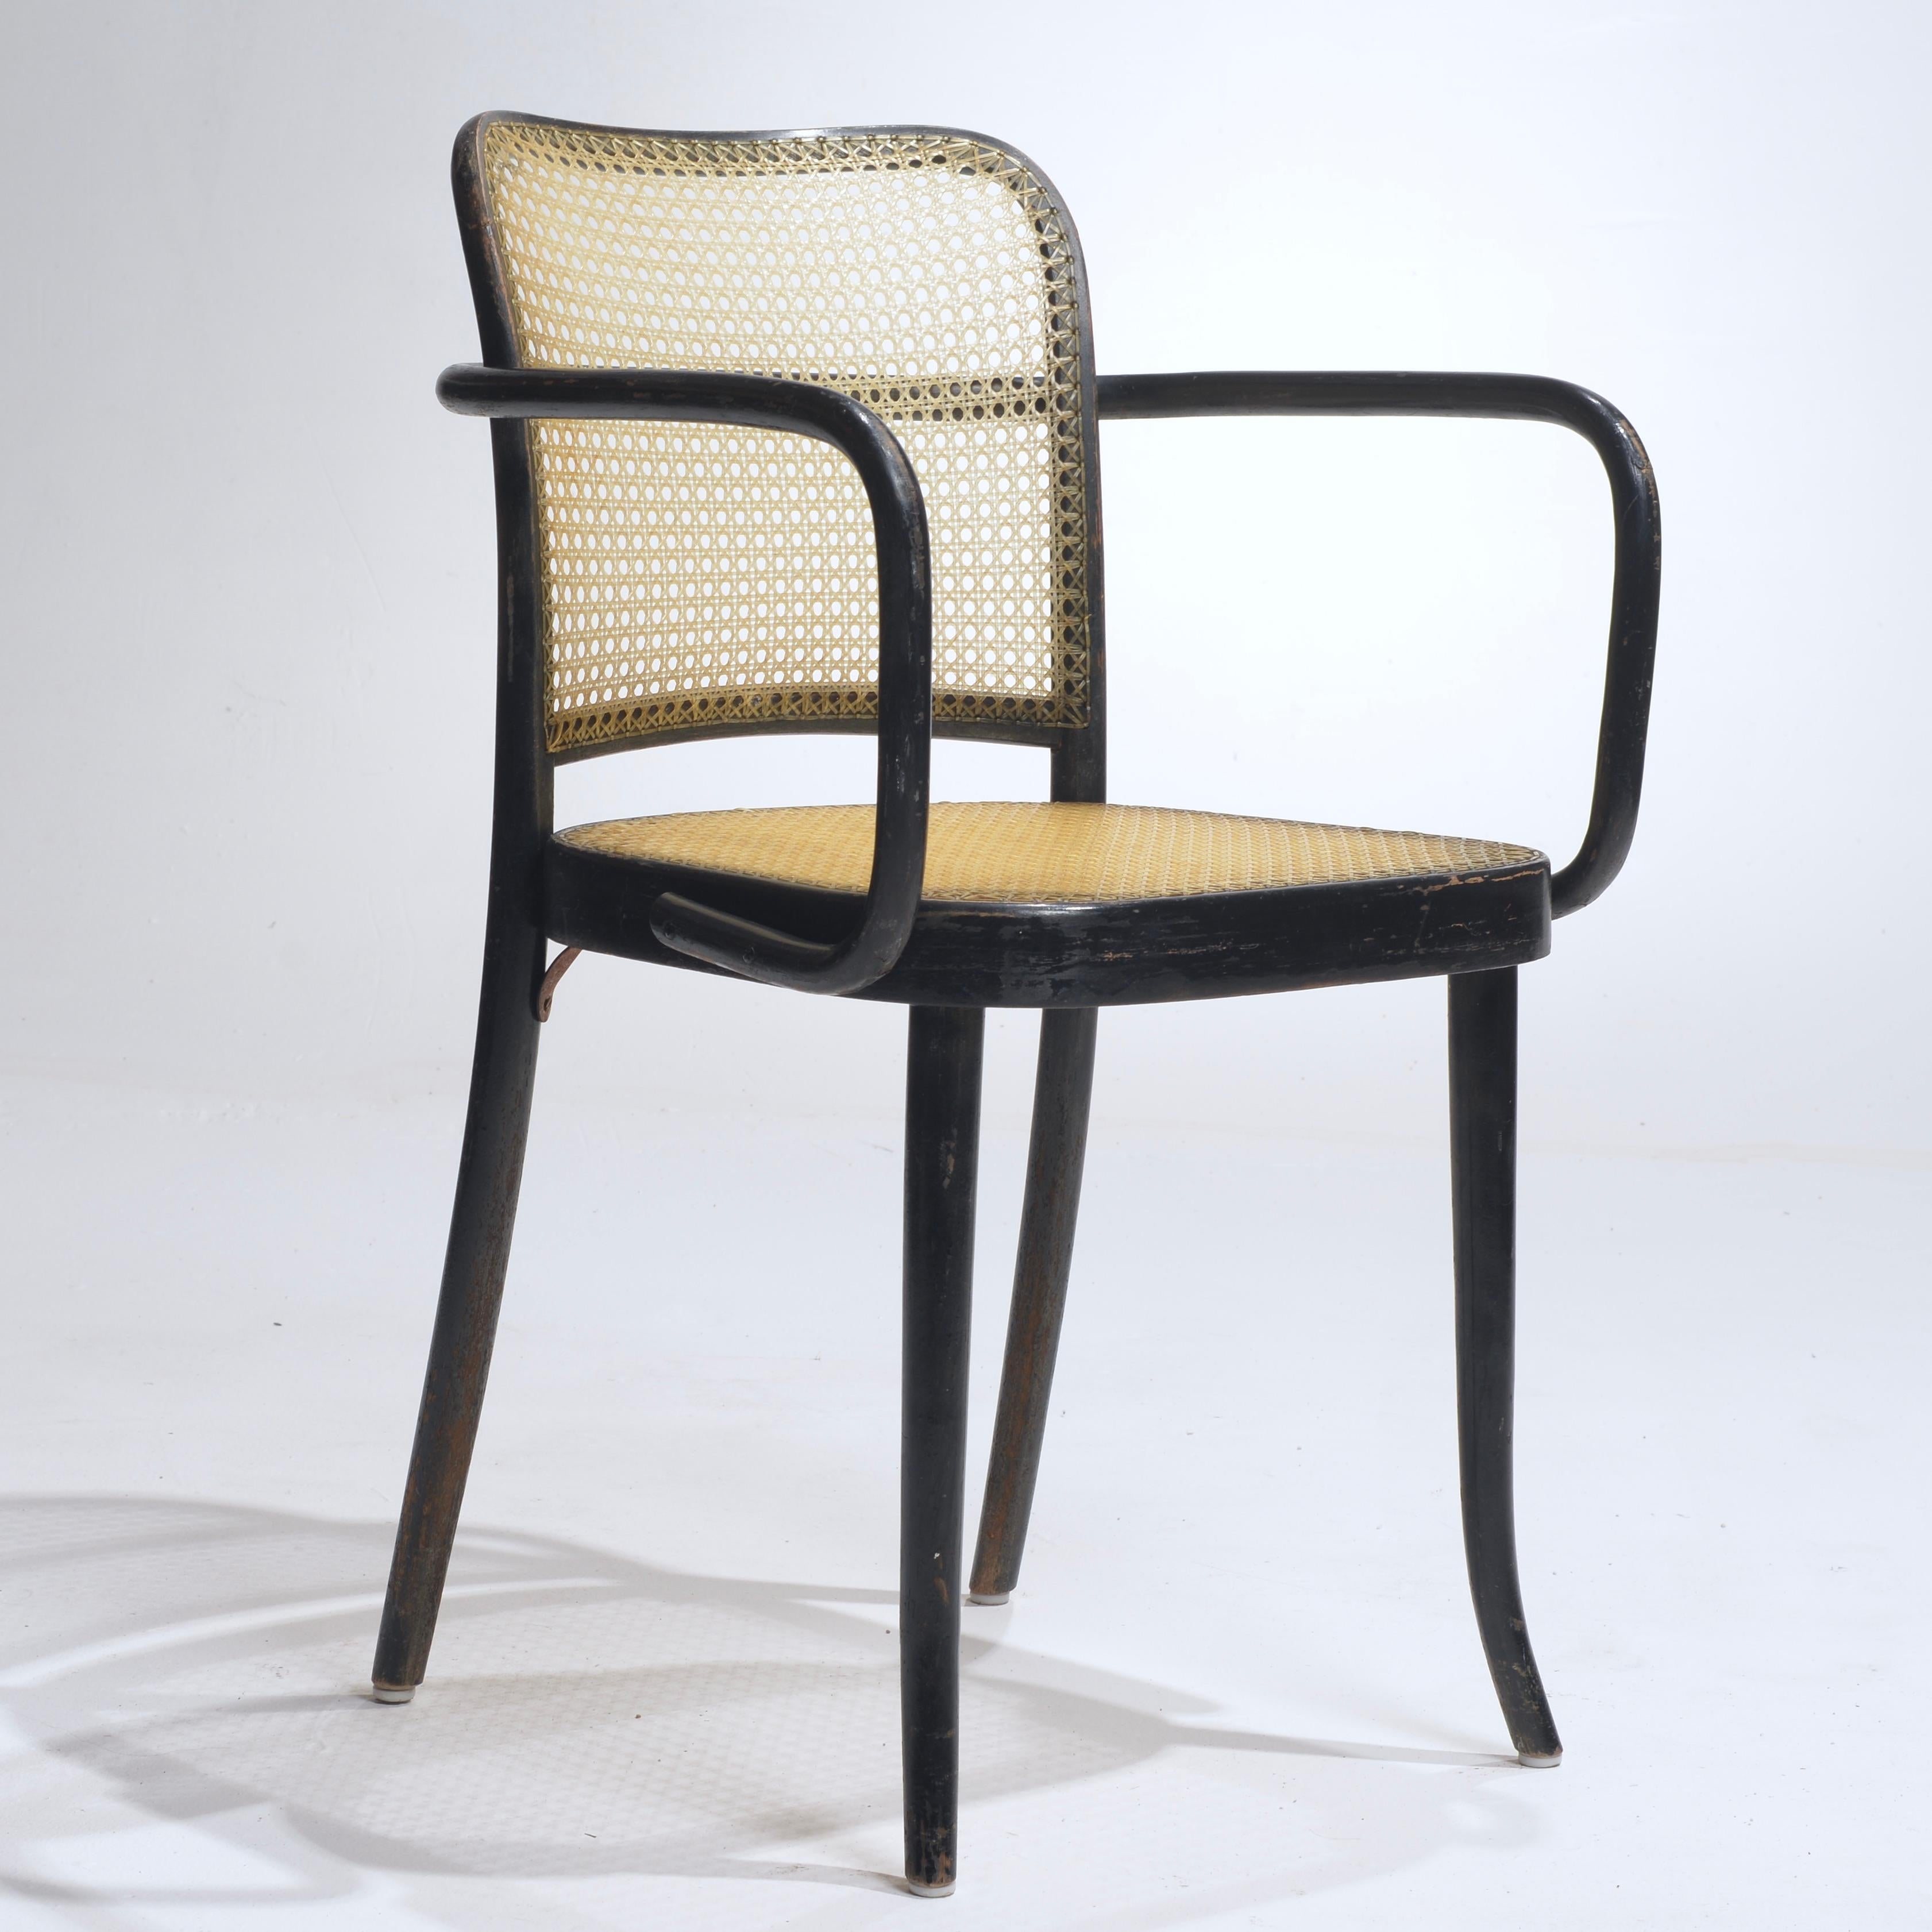 Josef Hoffmann Bentwood Beech Prague Model 811 Chairs in Black and Leather Weave For Sale 5